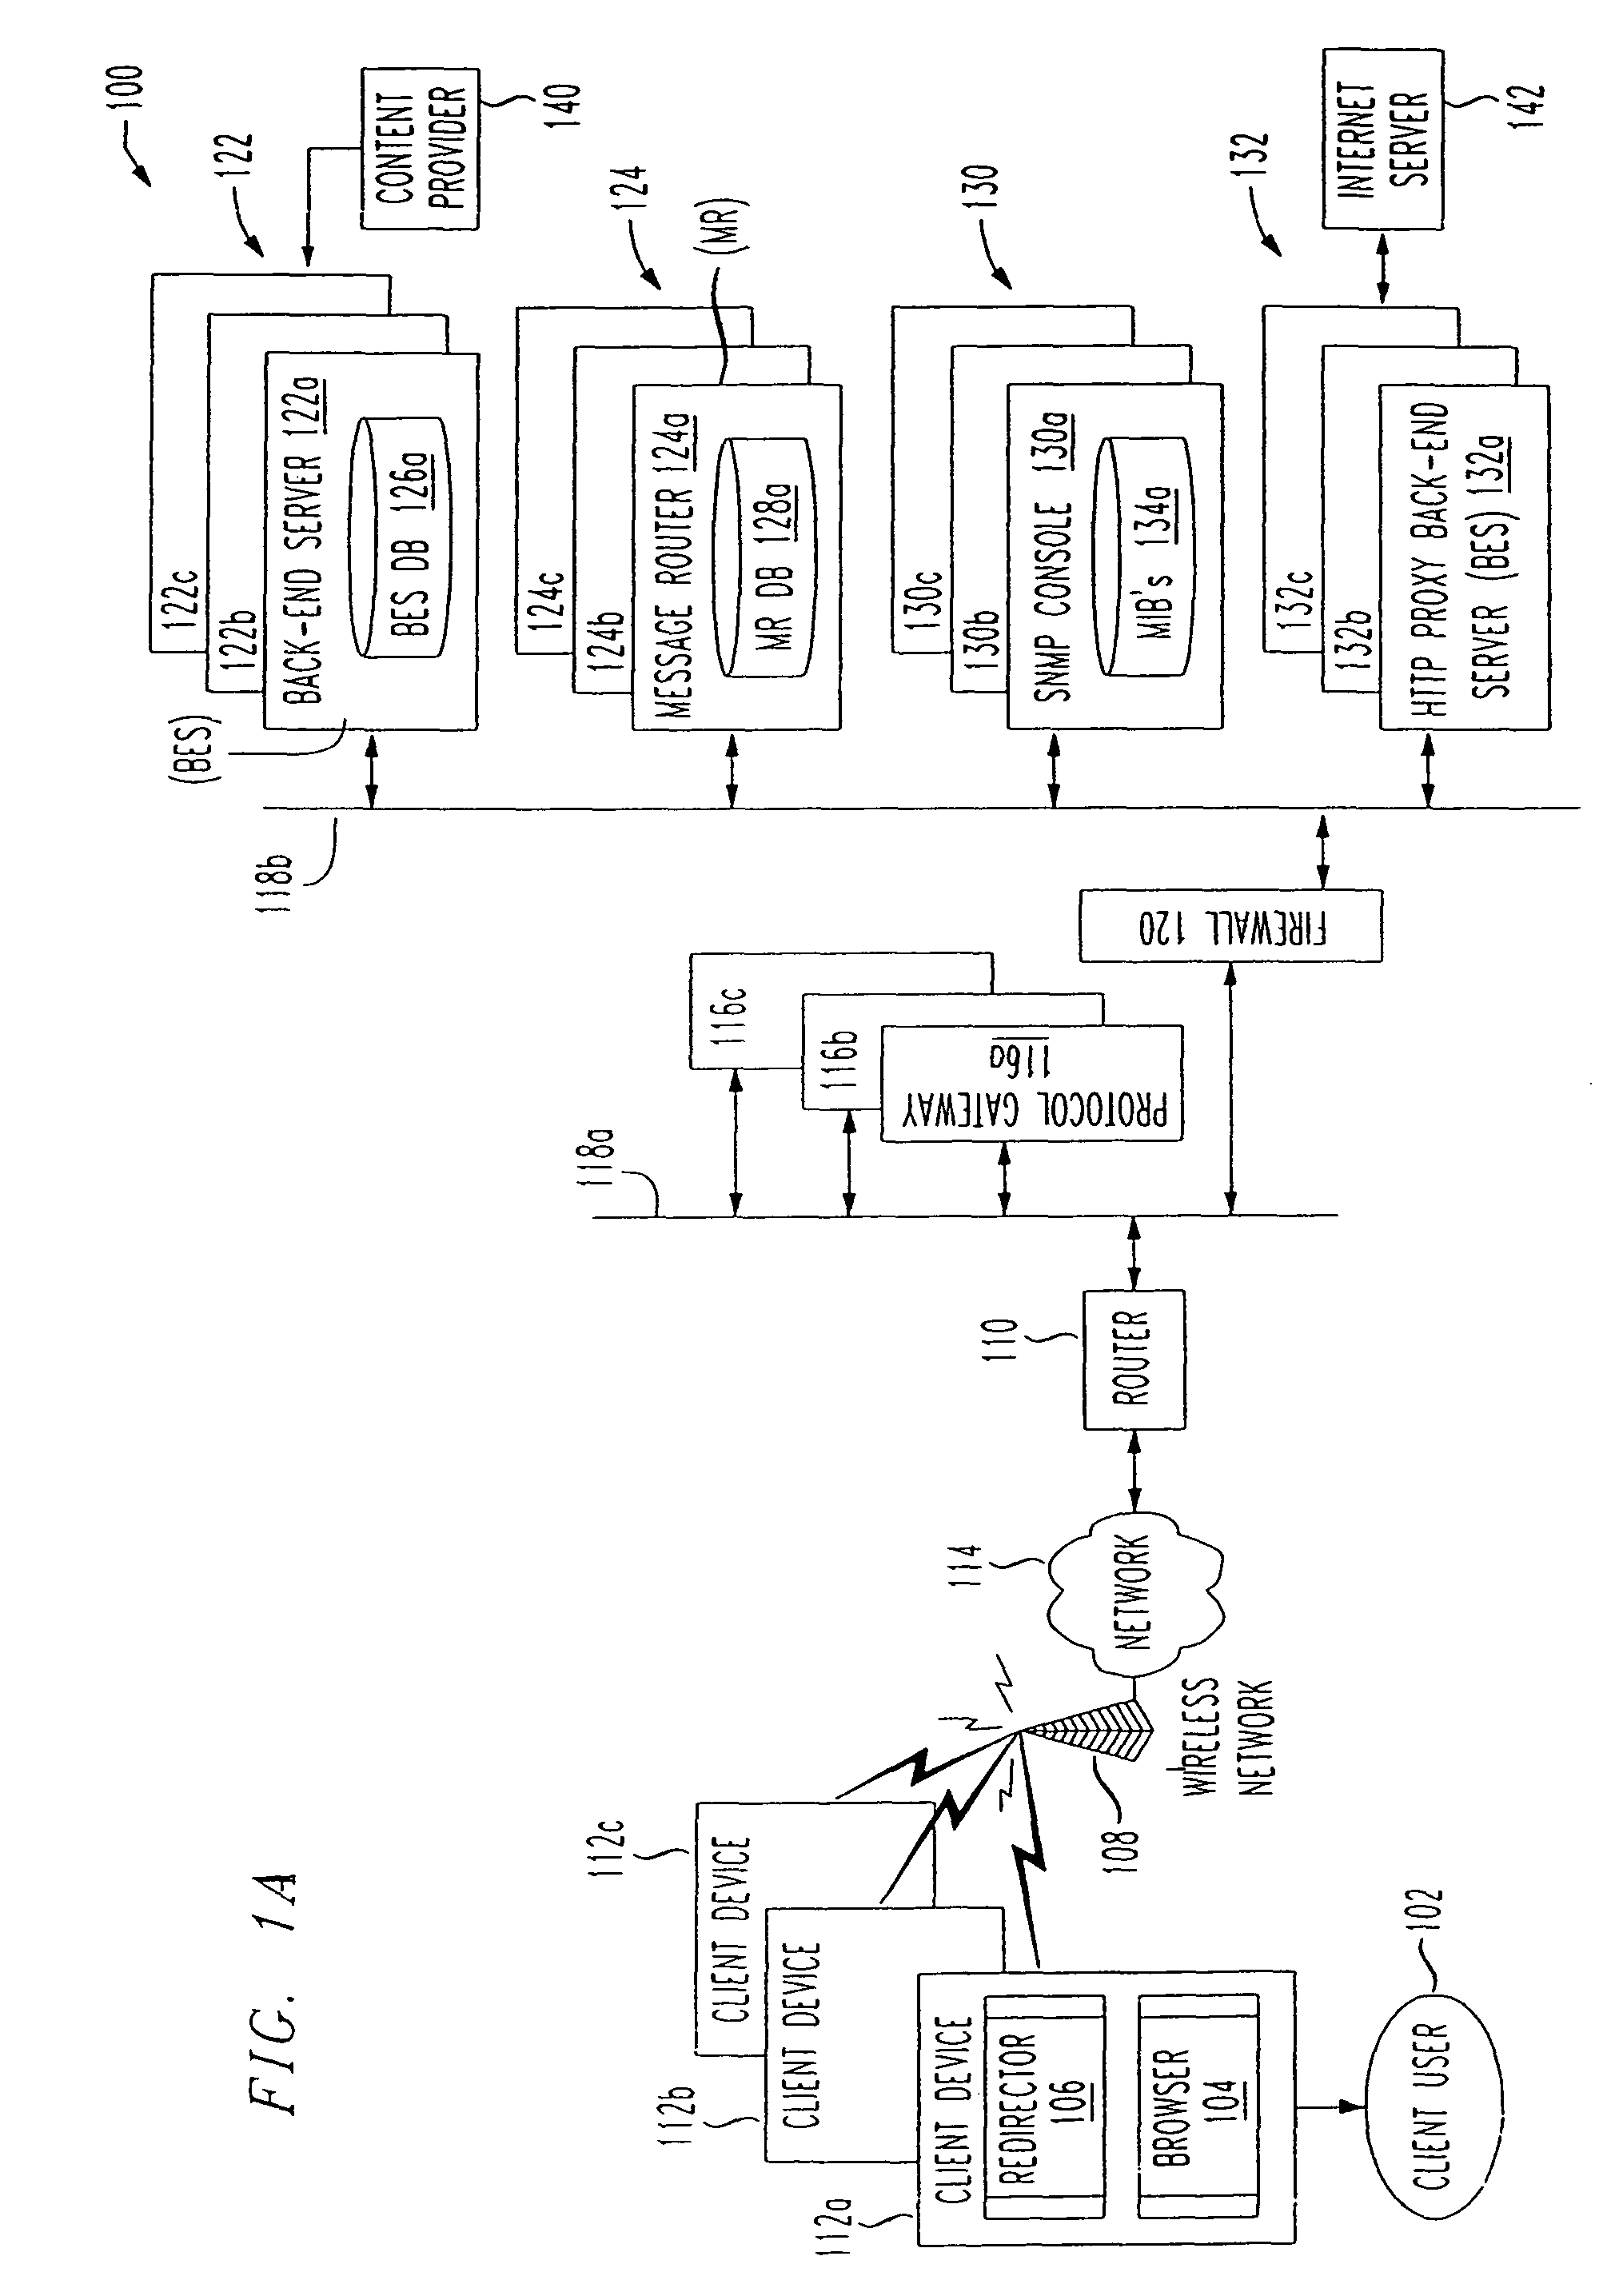 System and method to publish information from servers to remote monitor devices